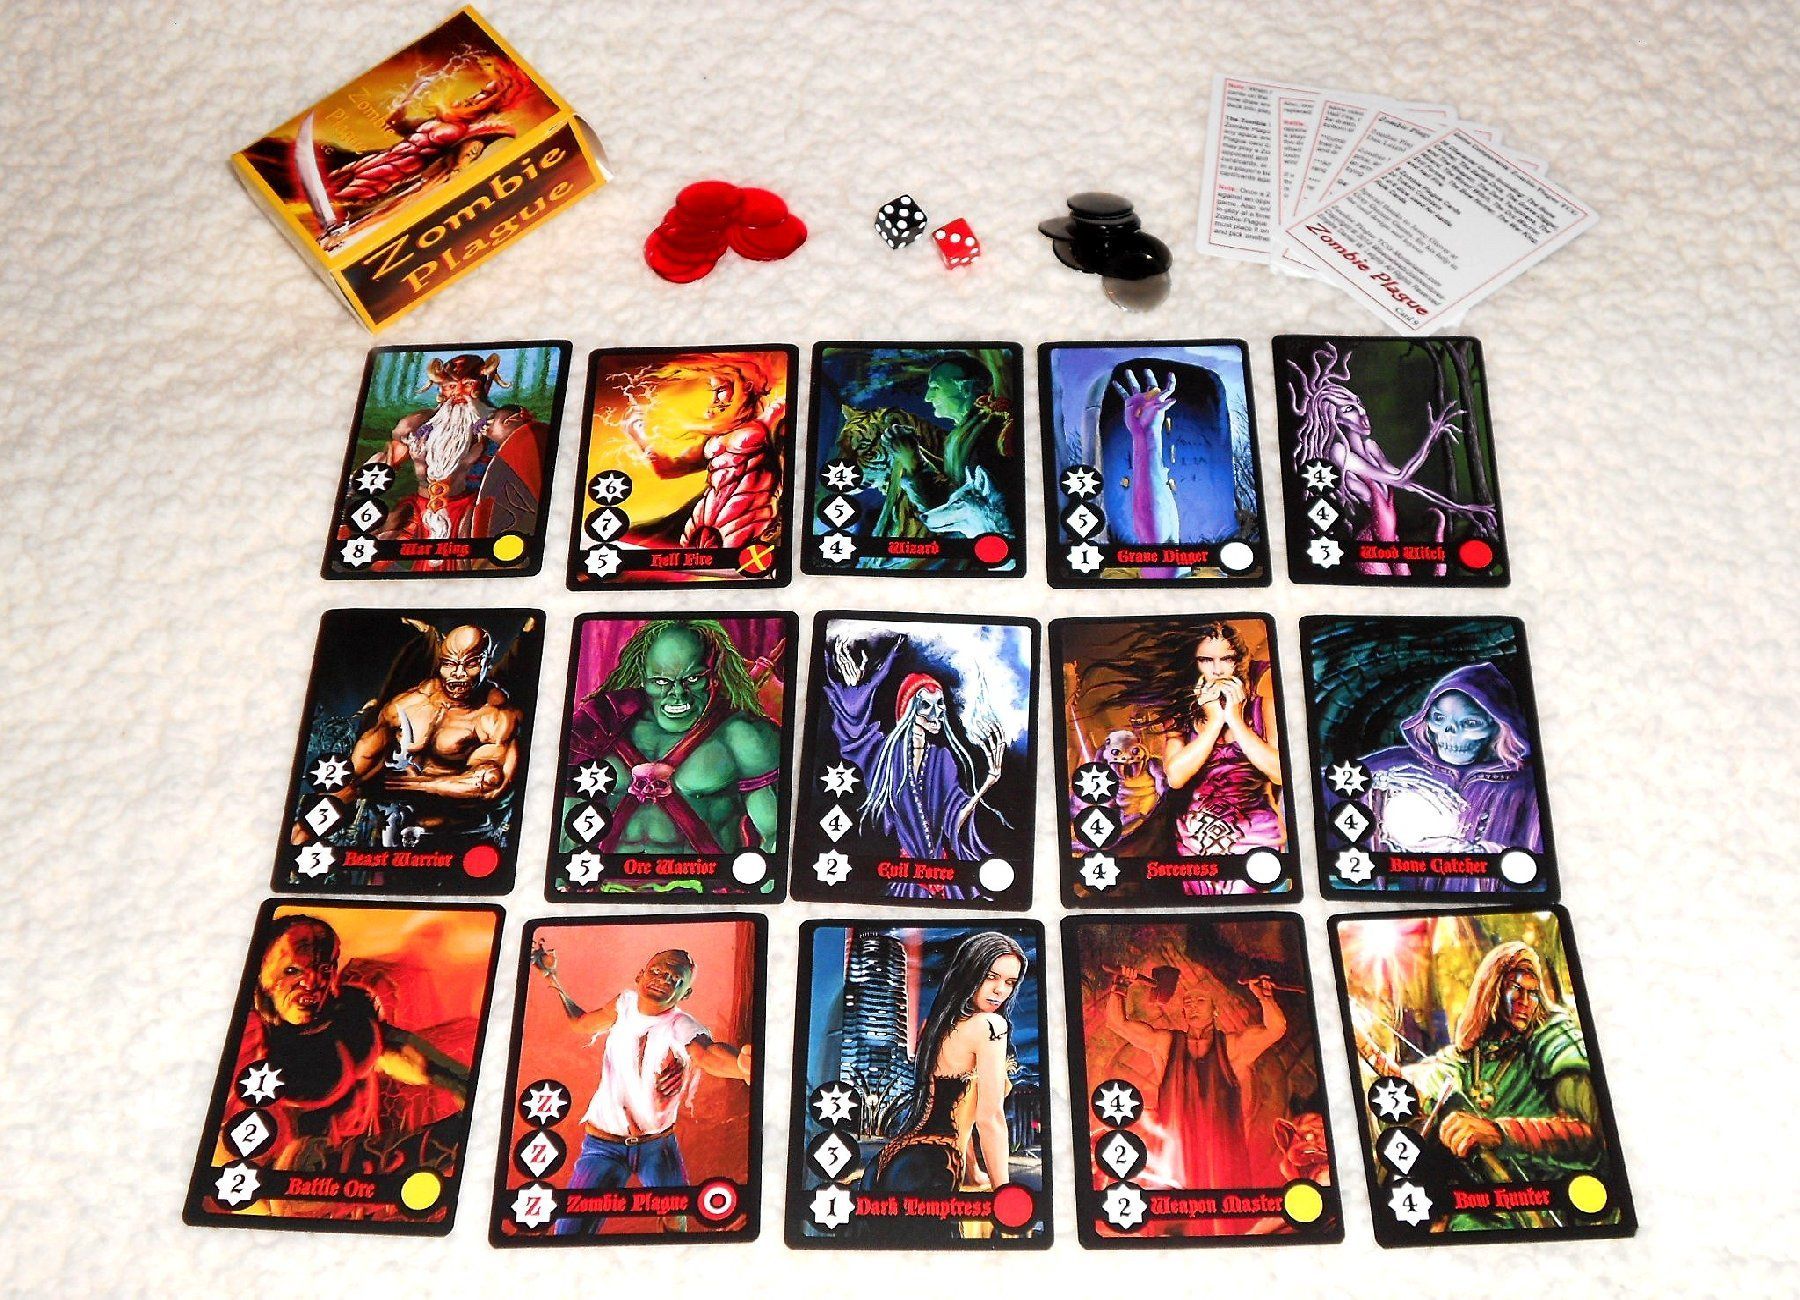 Zombie Plague (The Card Game)